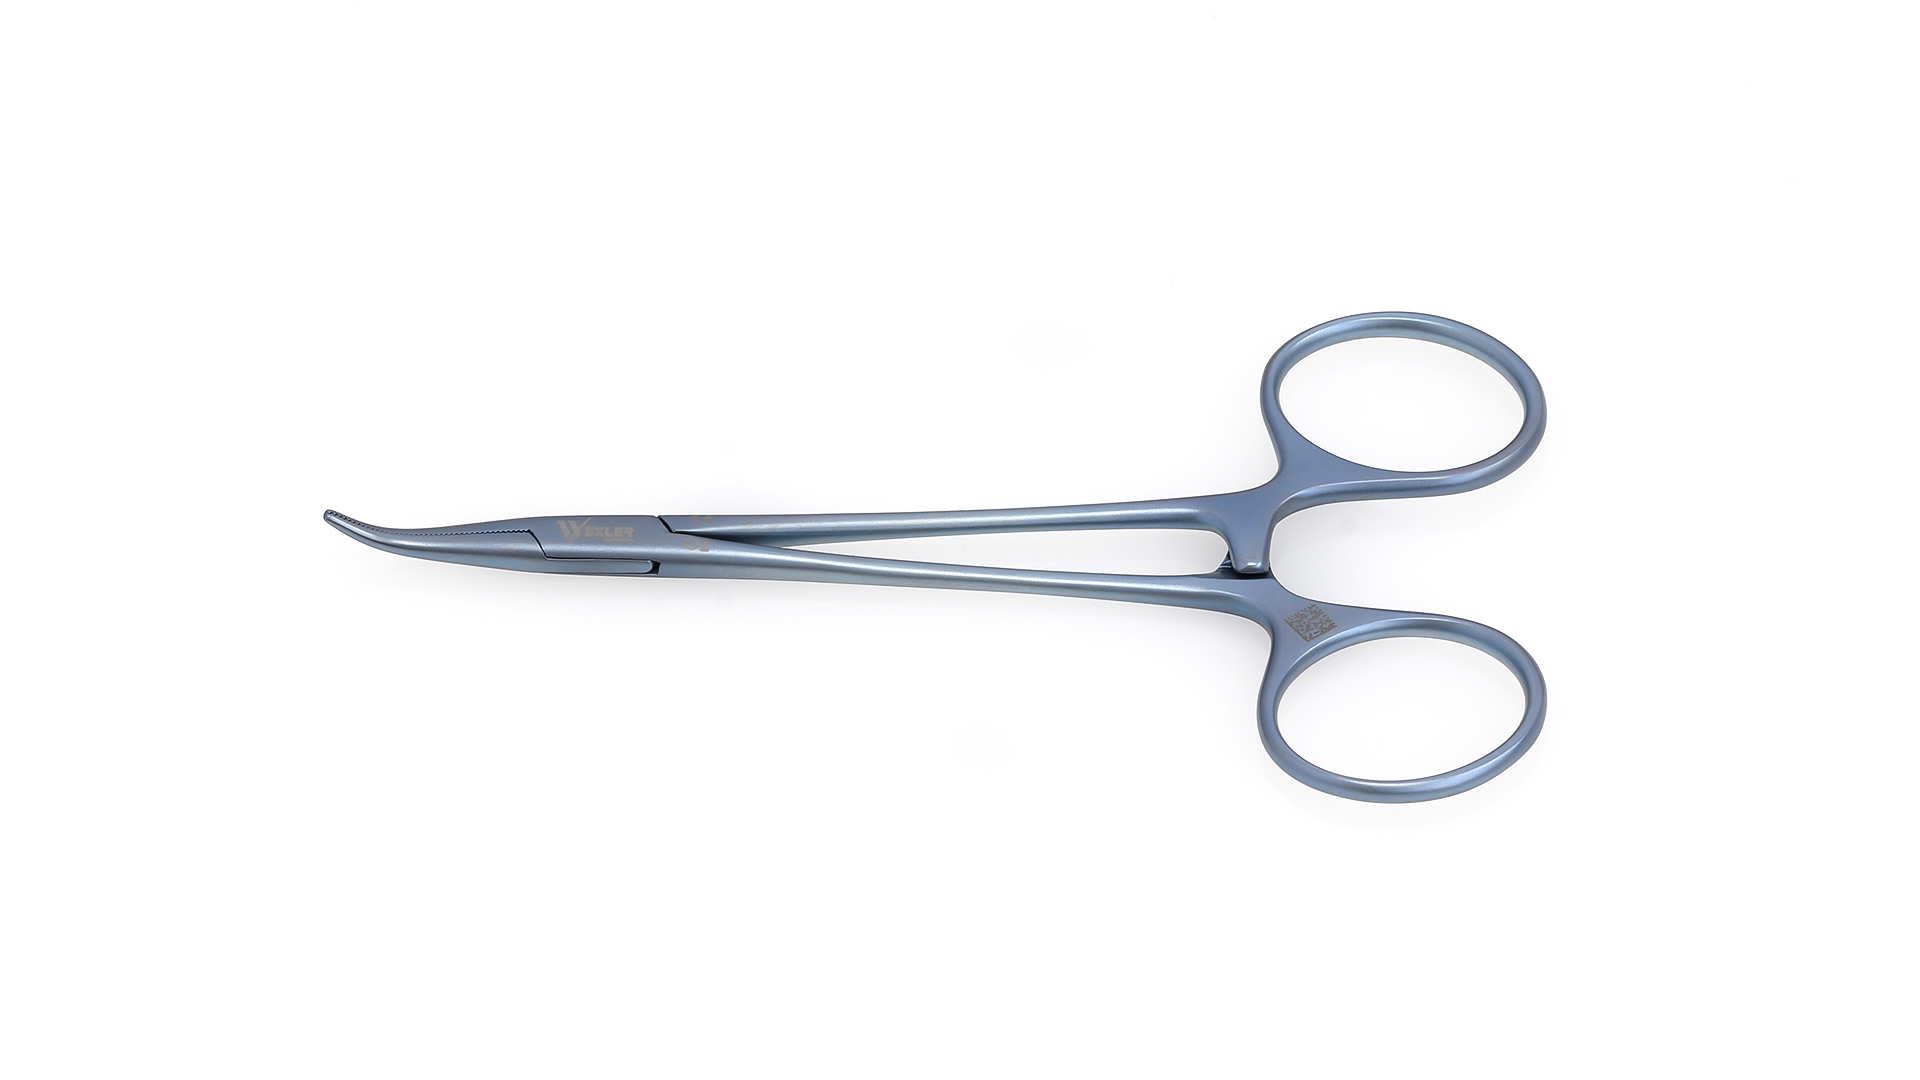 Halstead Forceps - Curved serrated jaws